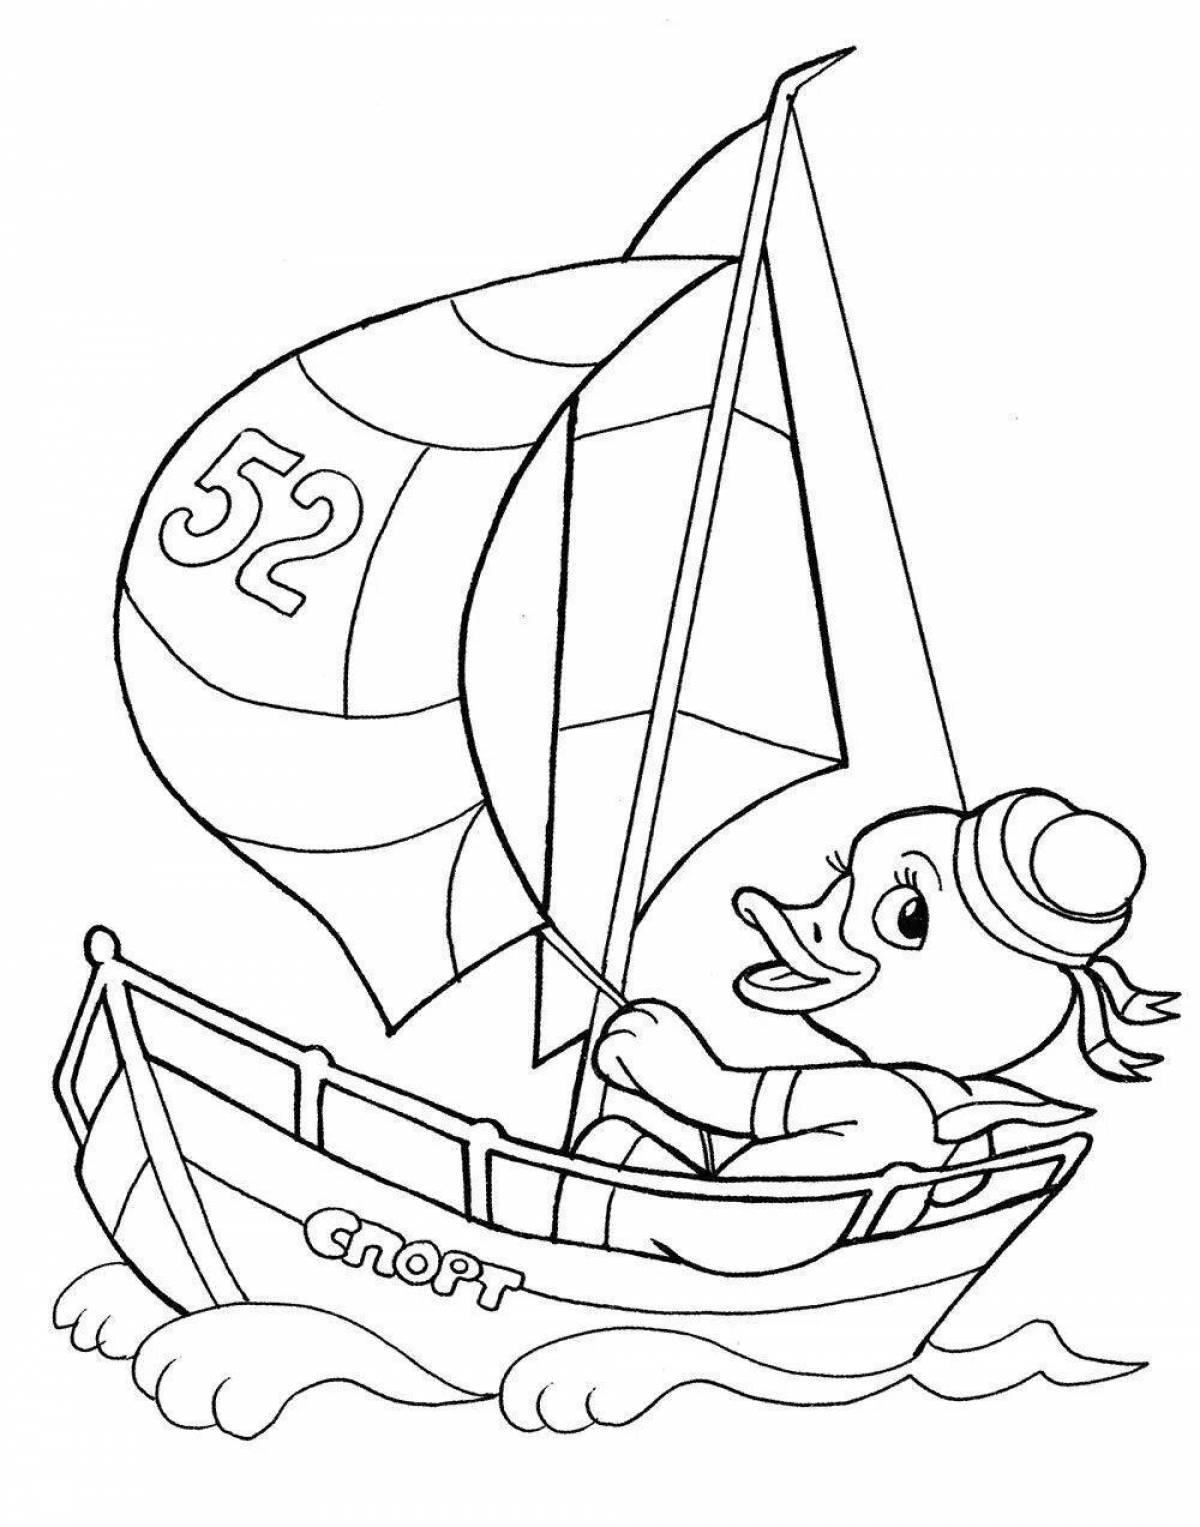 Fun coloring book for 5-6 year old boys